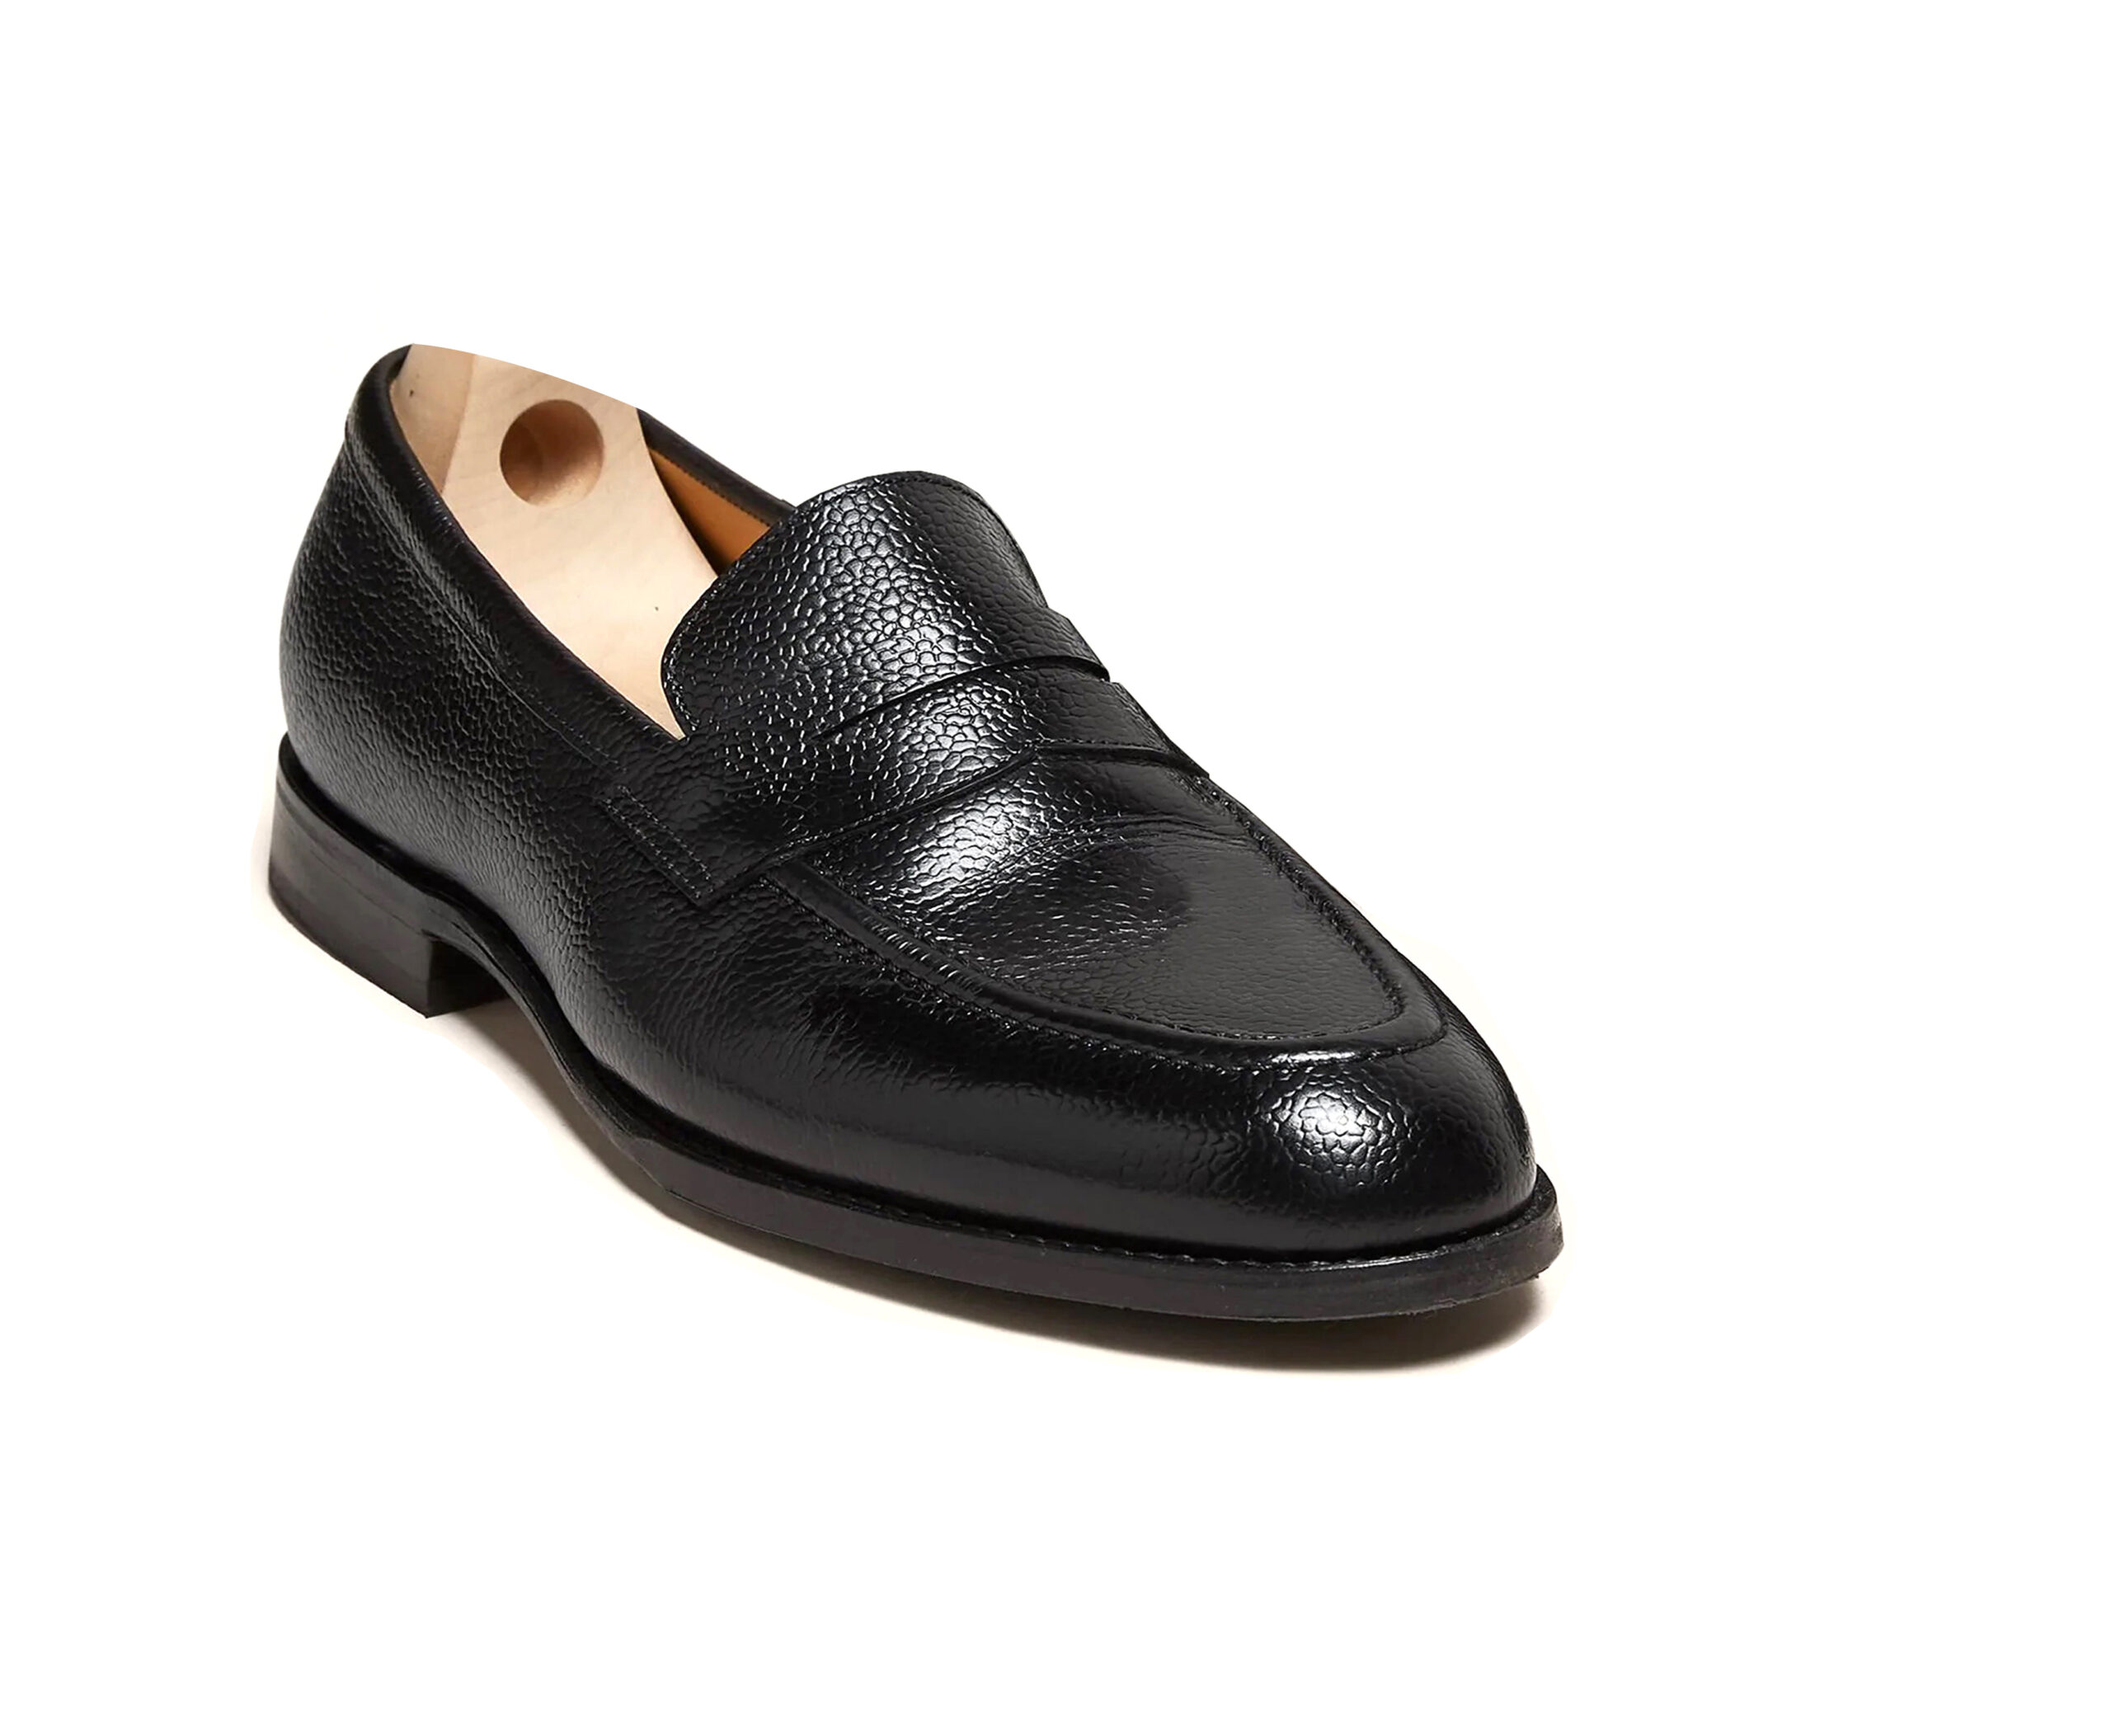 The Penny Loafer - Black Suede, Crafted by Hand